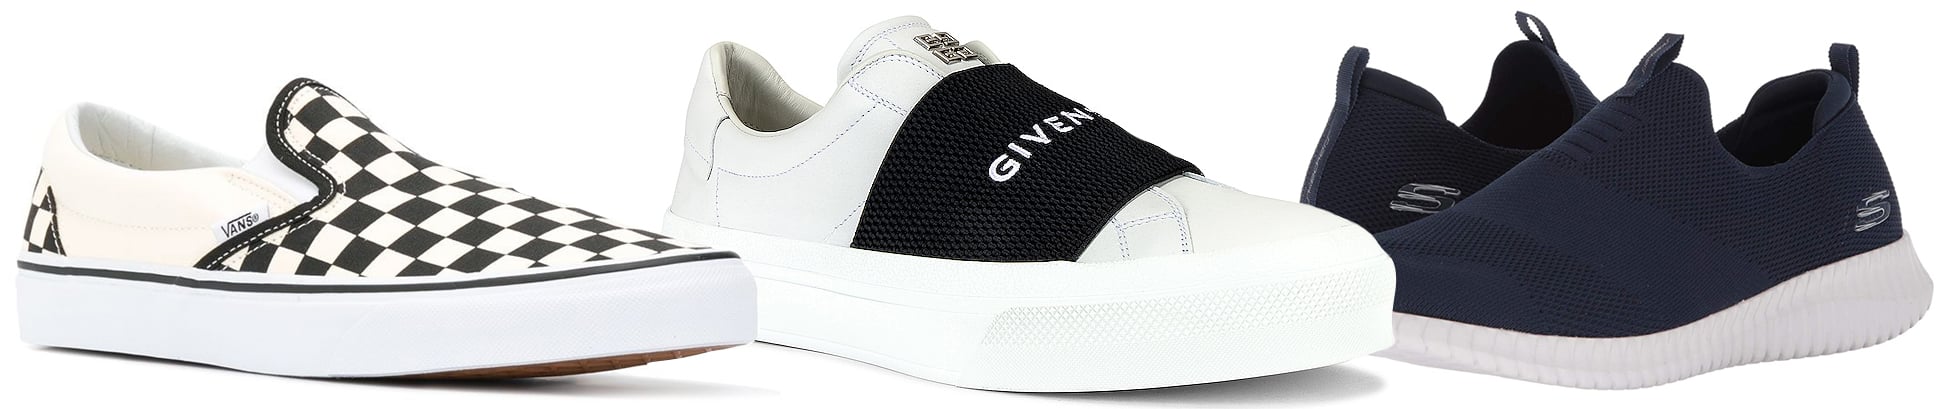 Three stylish slip-on sneakers from Vans, Givenchy, and Skechers